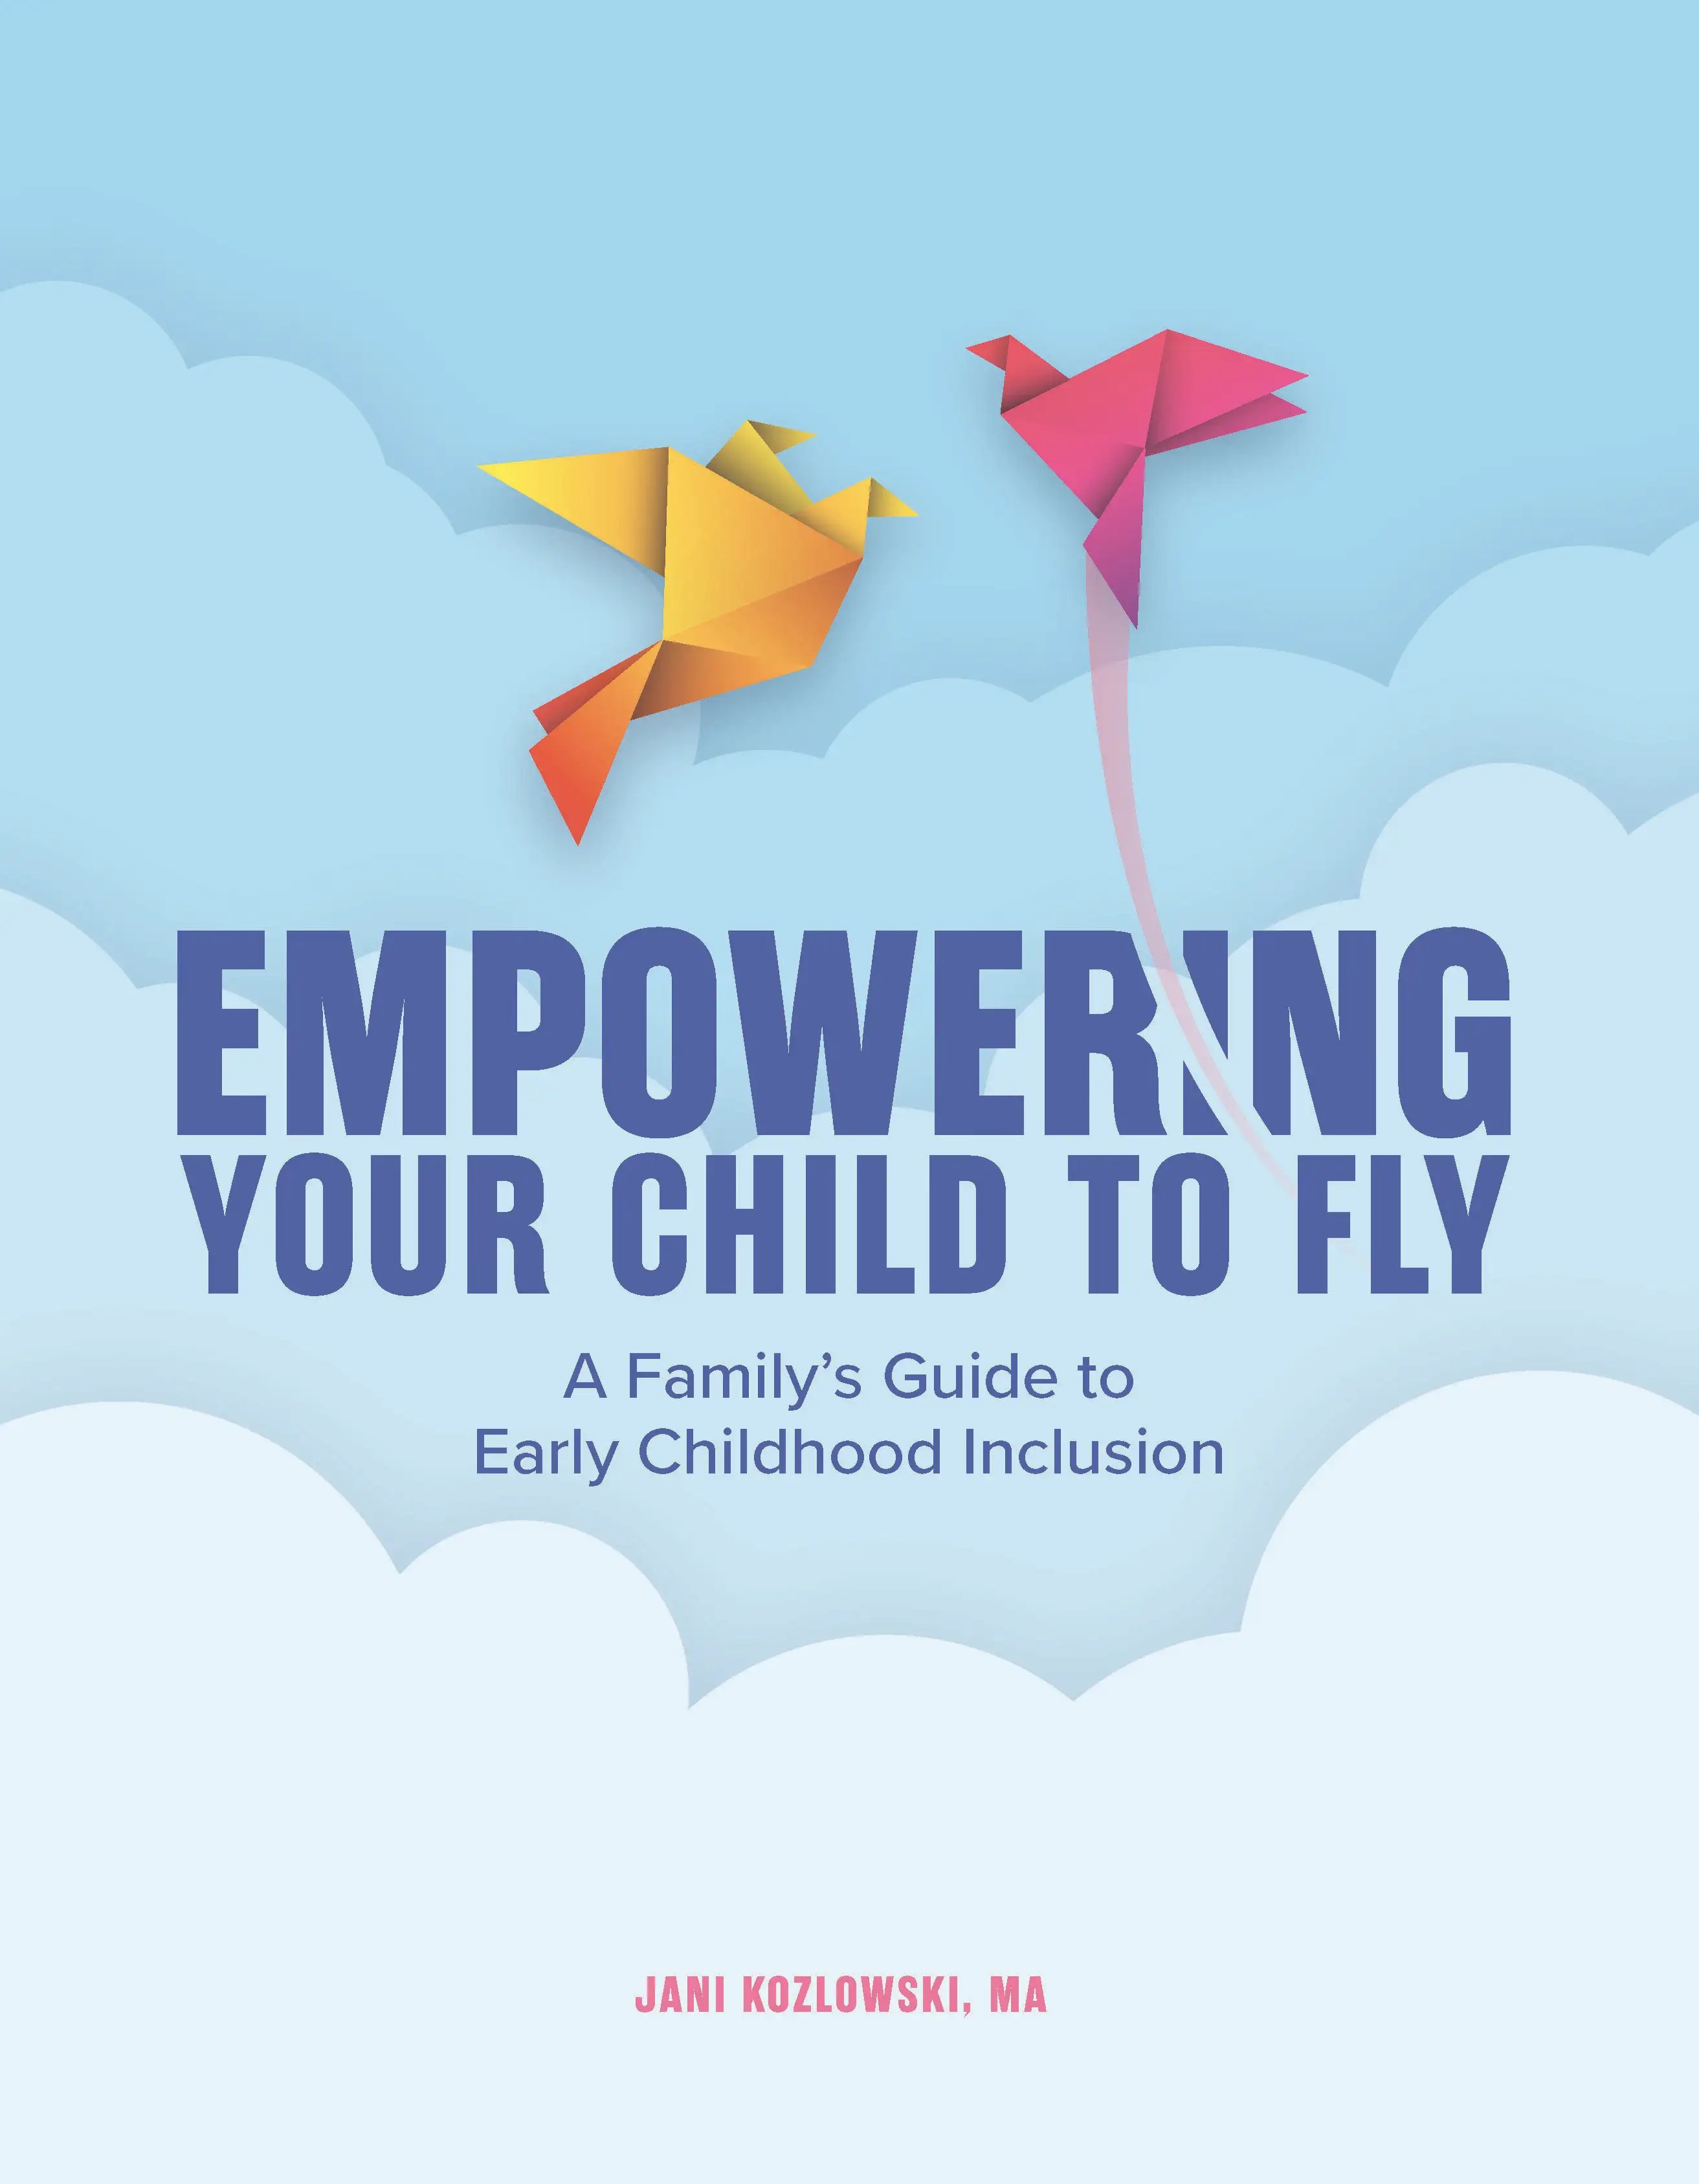 Cover of the book Empowering Your Child to Fly, which shows two origami birds (one large, one smaller) flying above the clouds